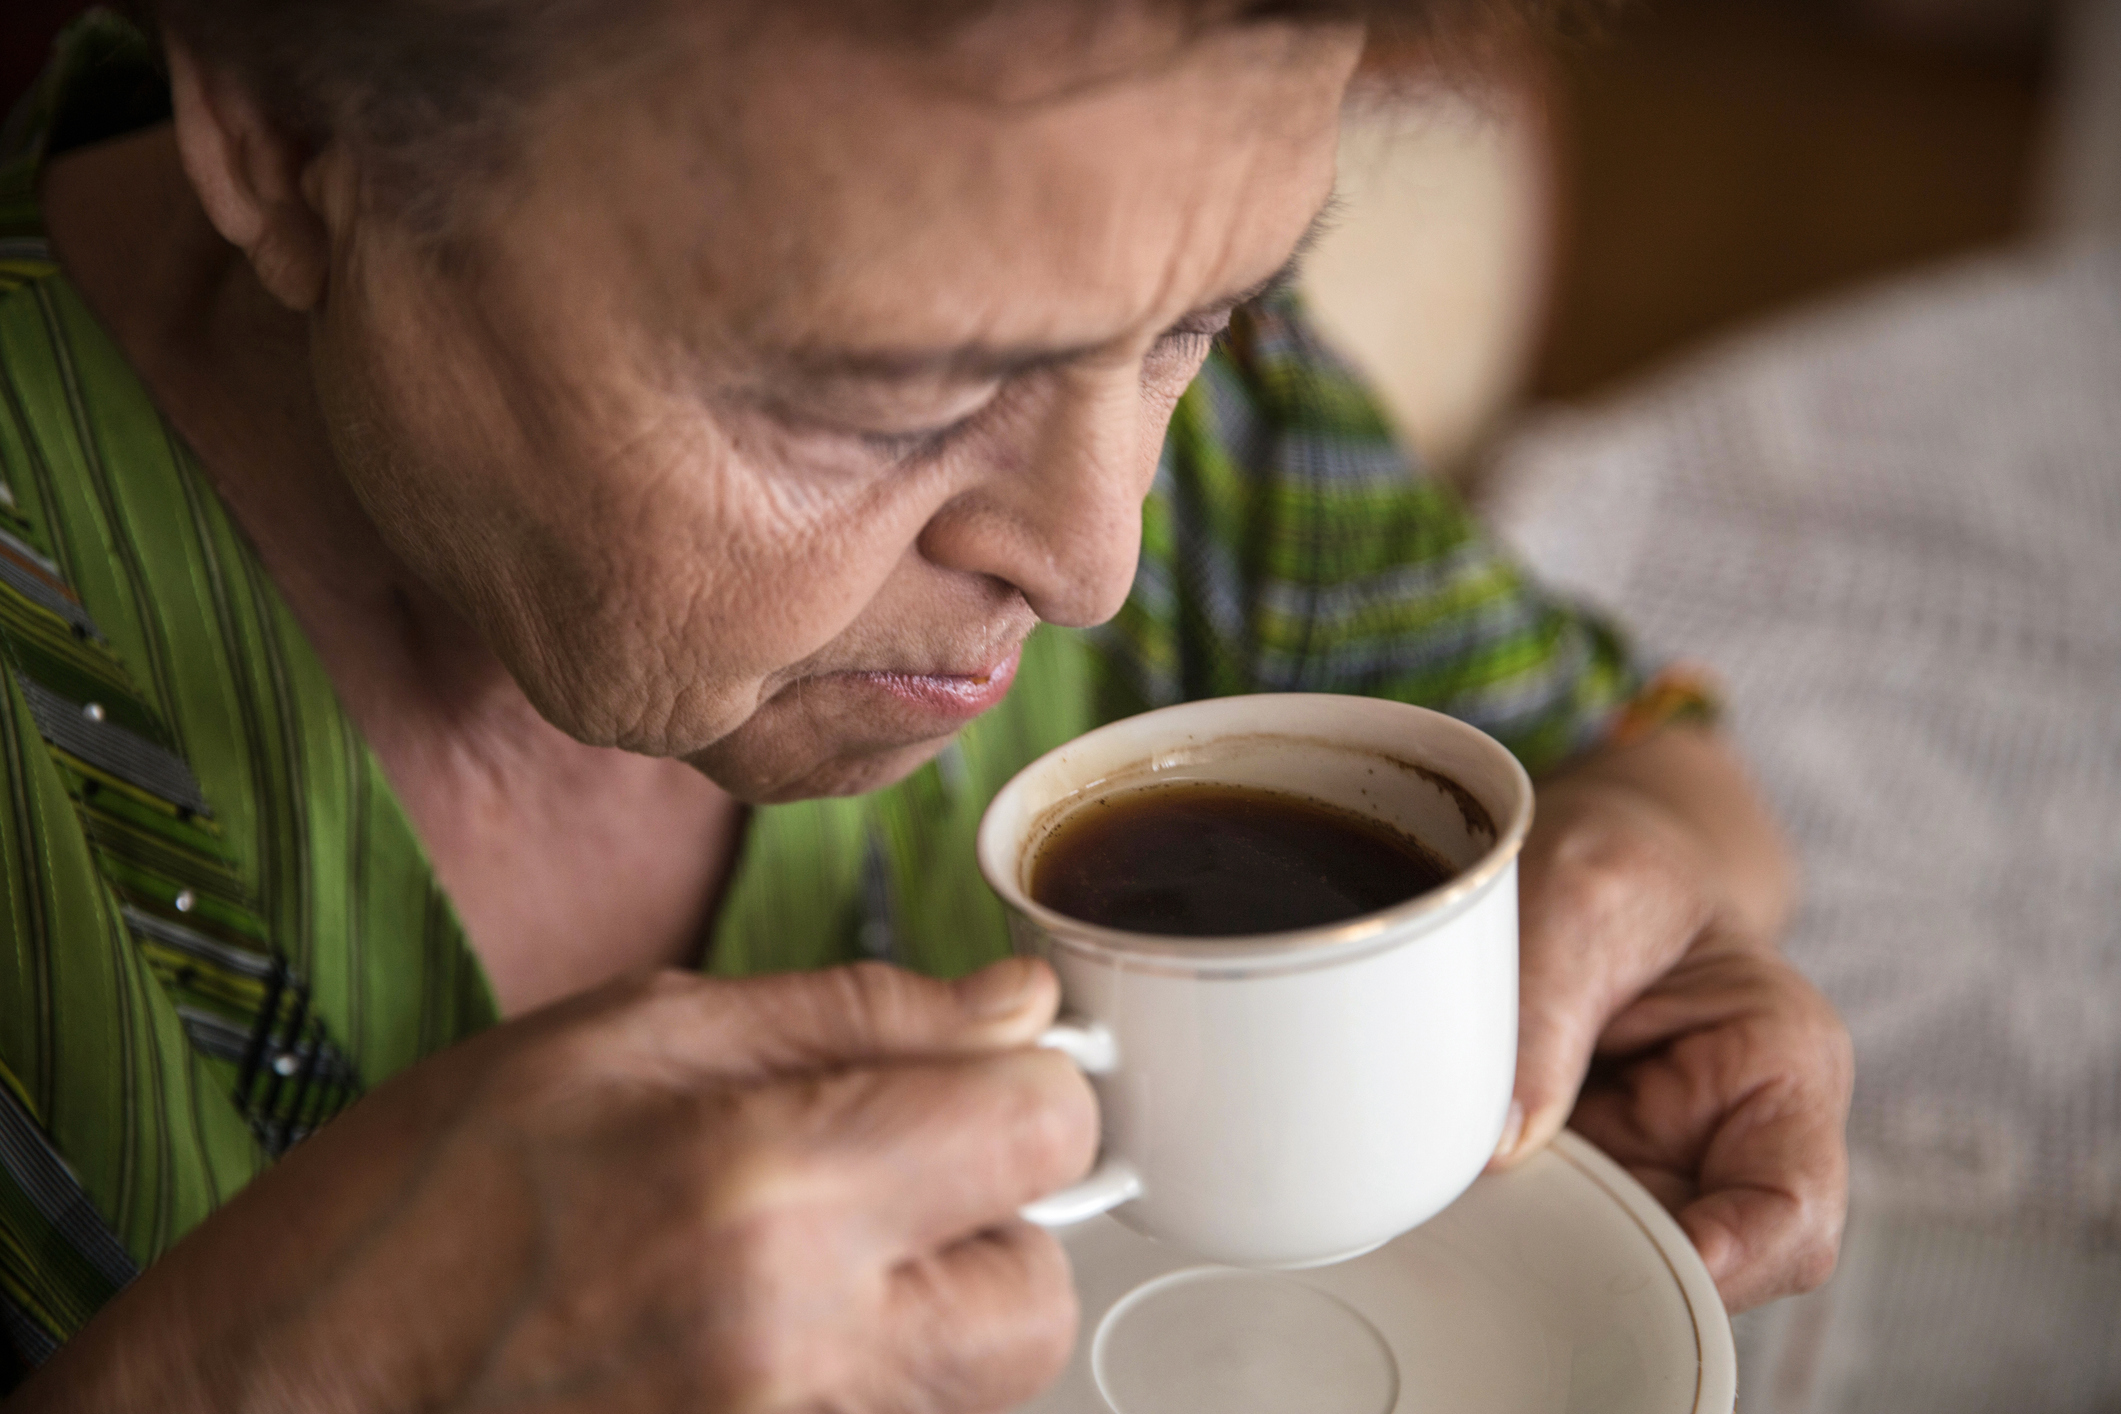 Study suggests coffee may prevent Alzheimer’s disease.